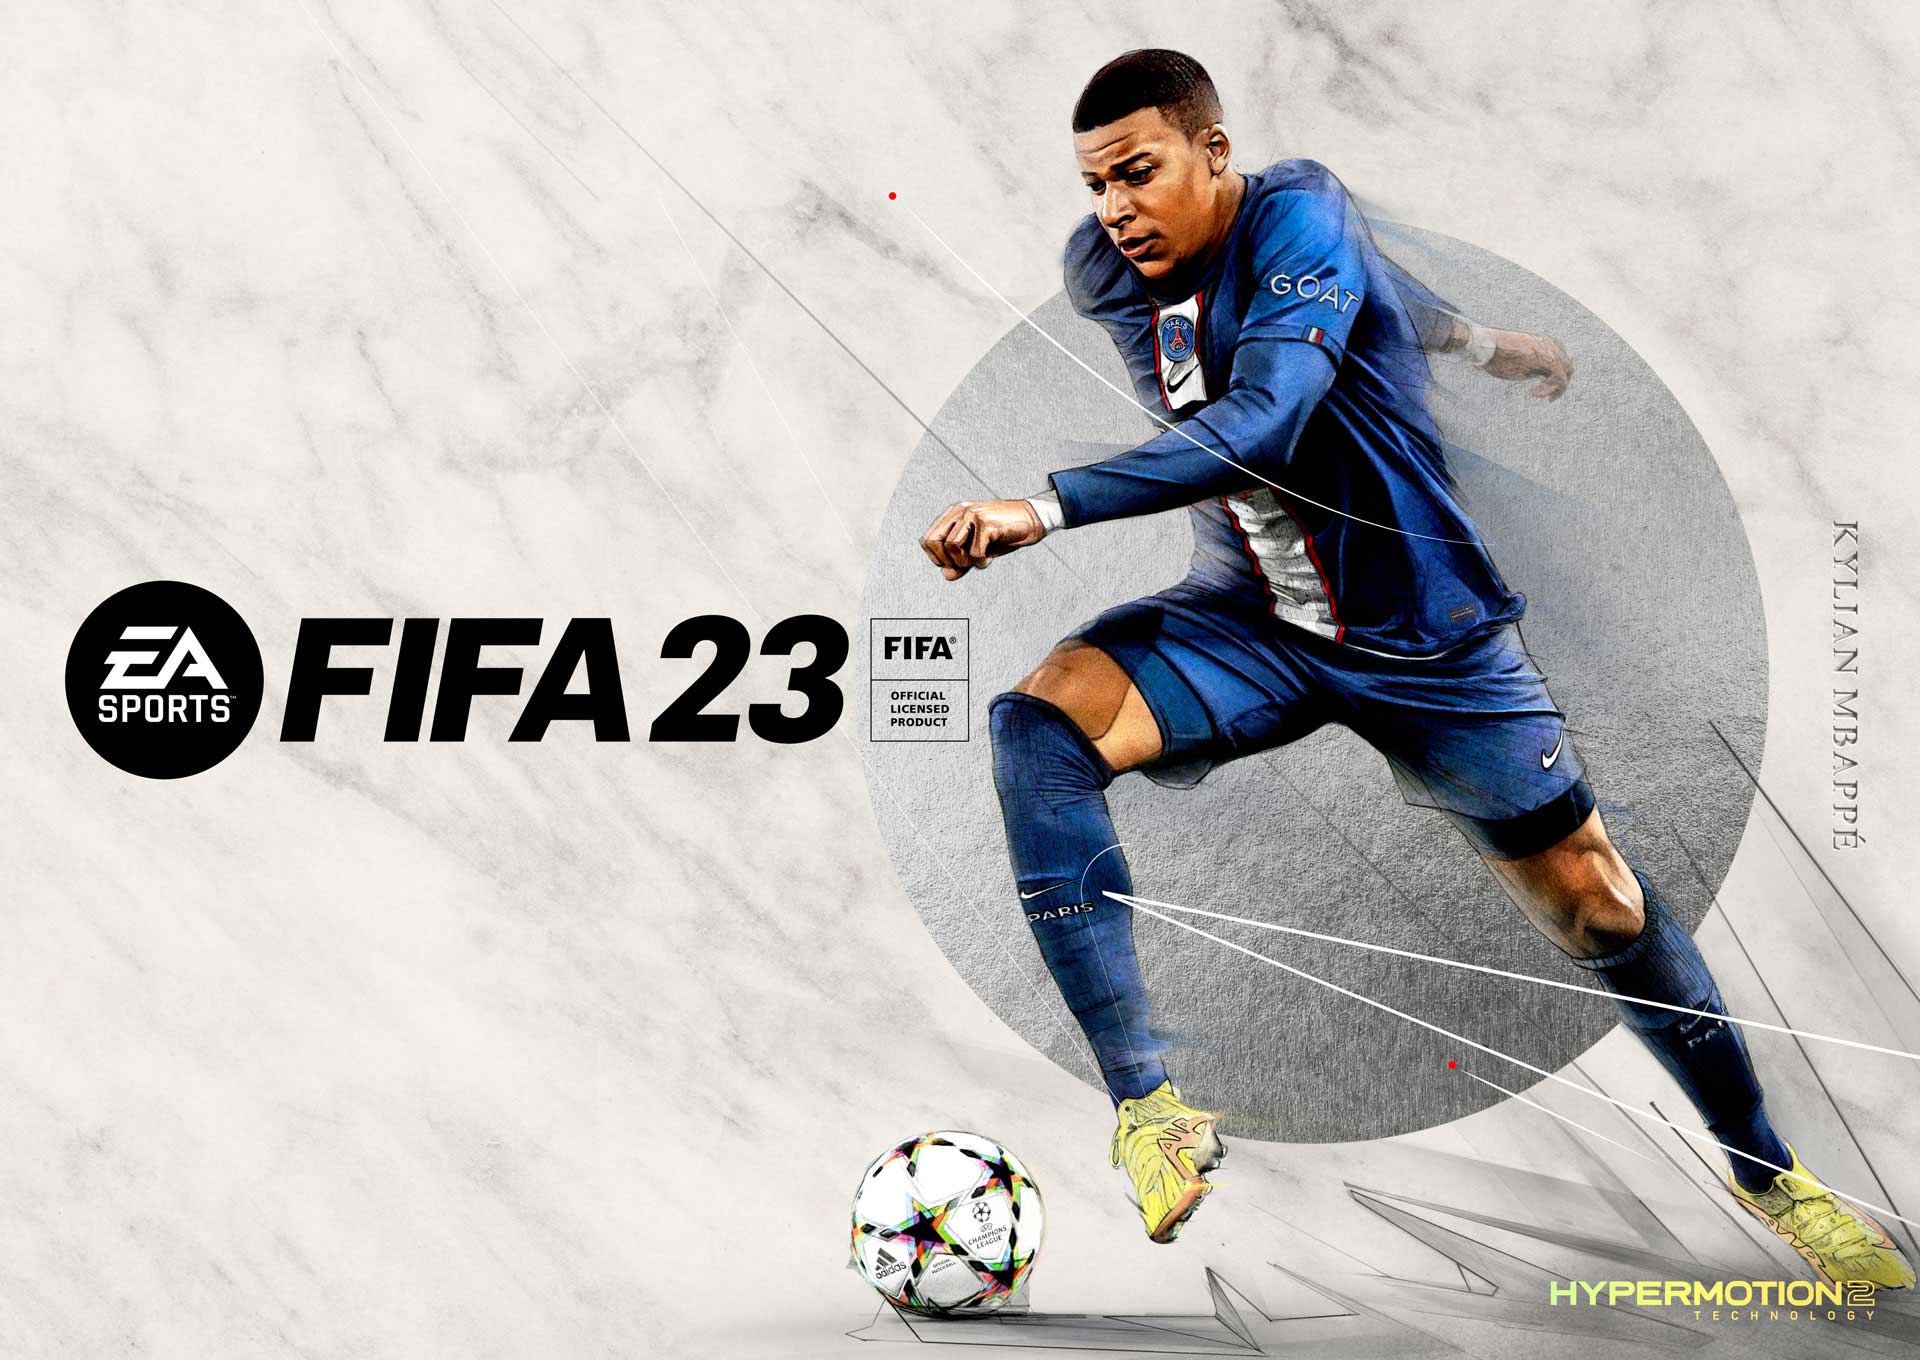 FIFA 23, Fast Paced Gifting , fastpacedgifting.com